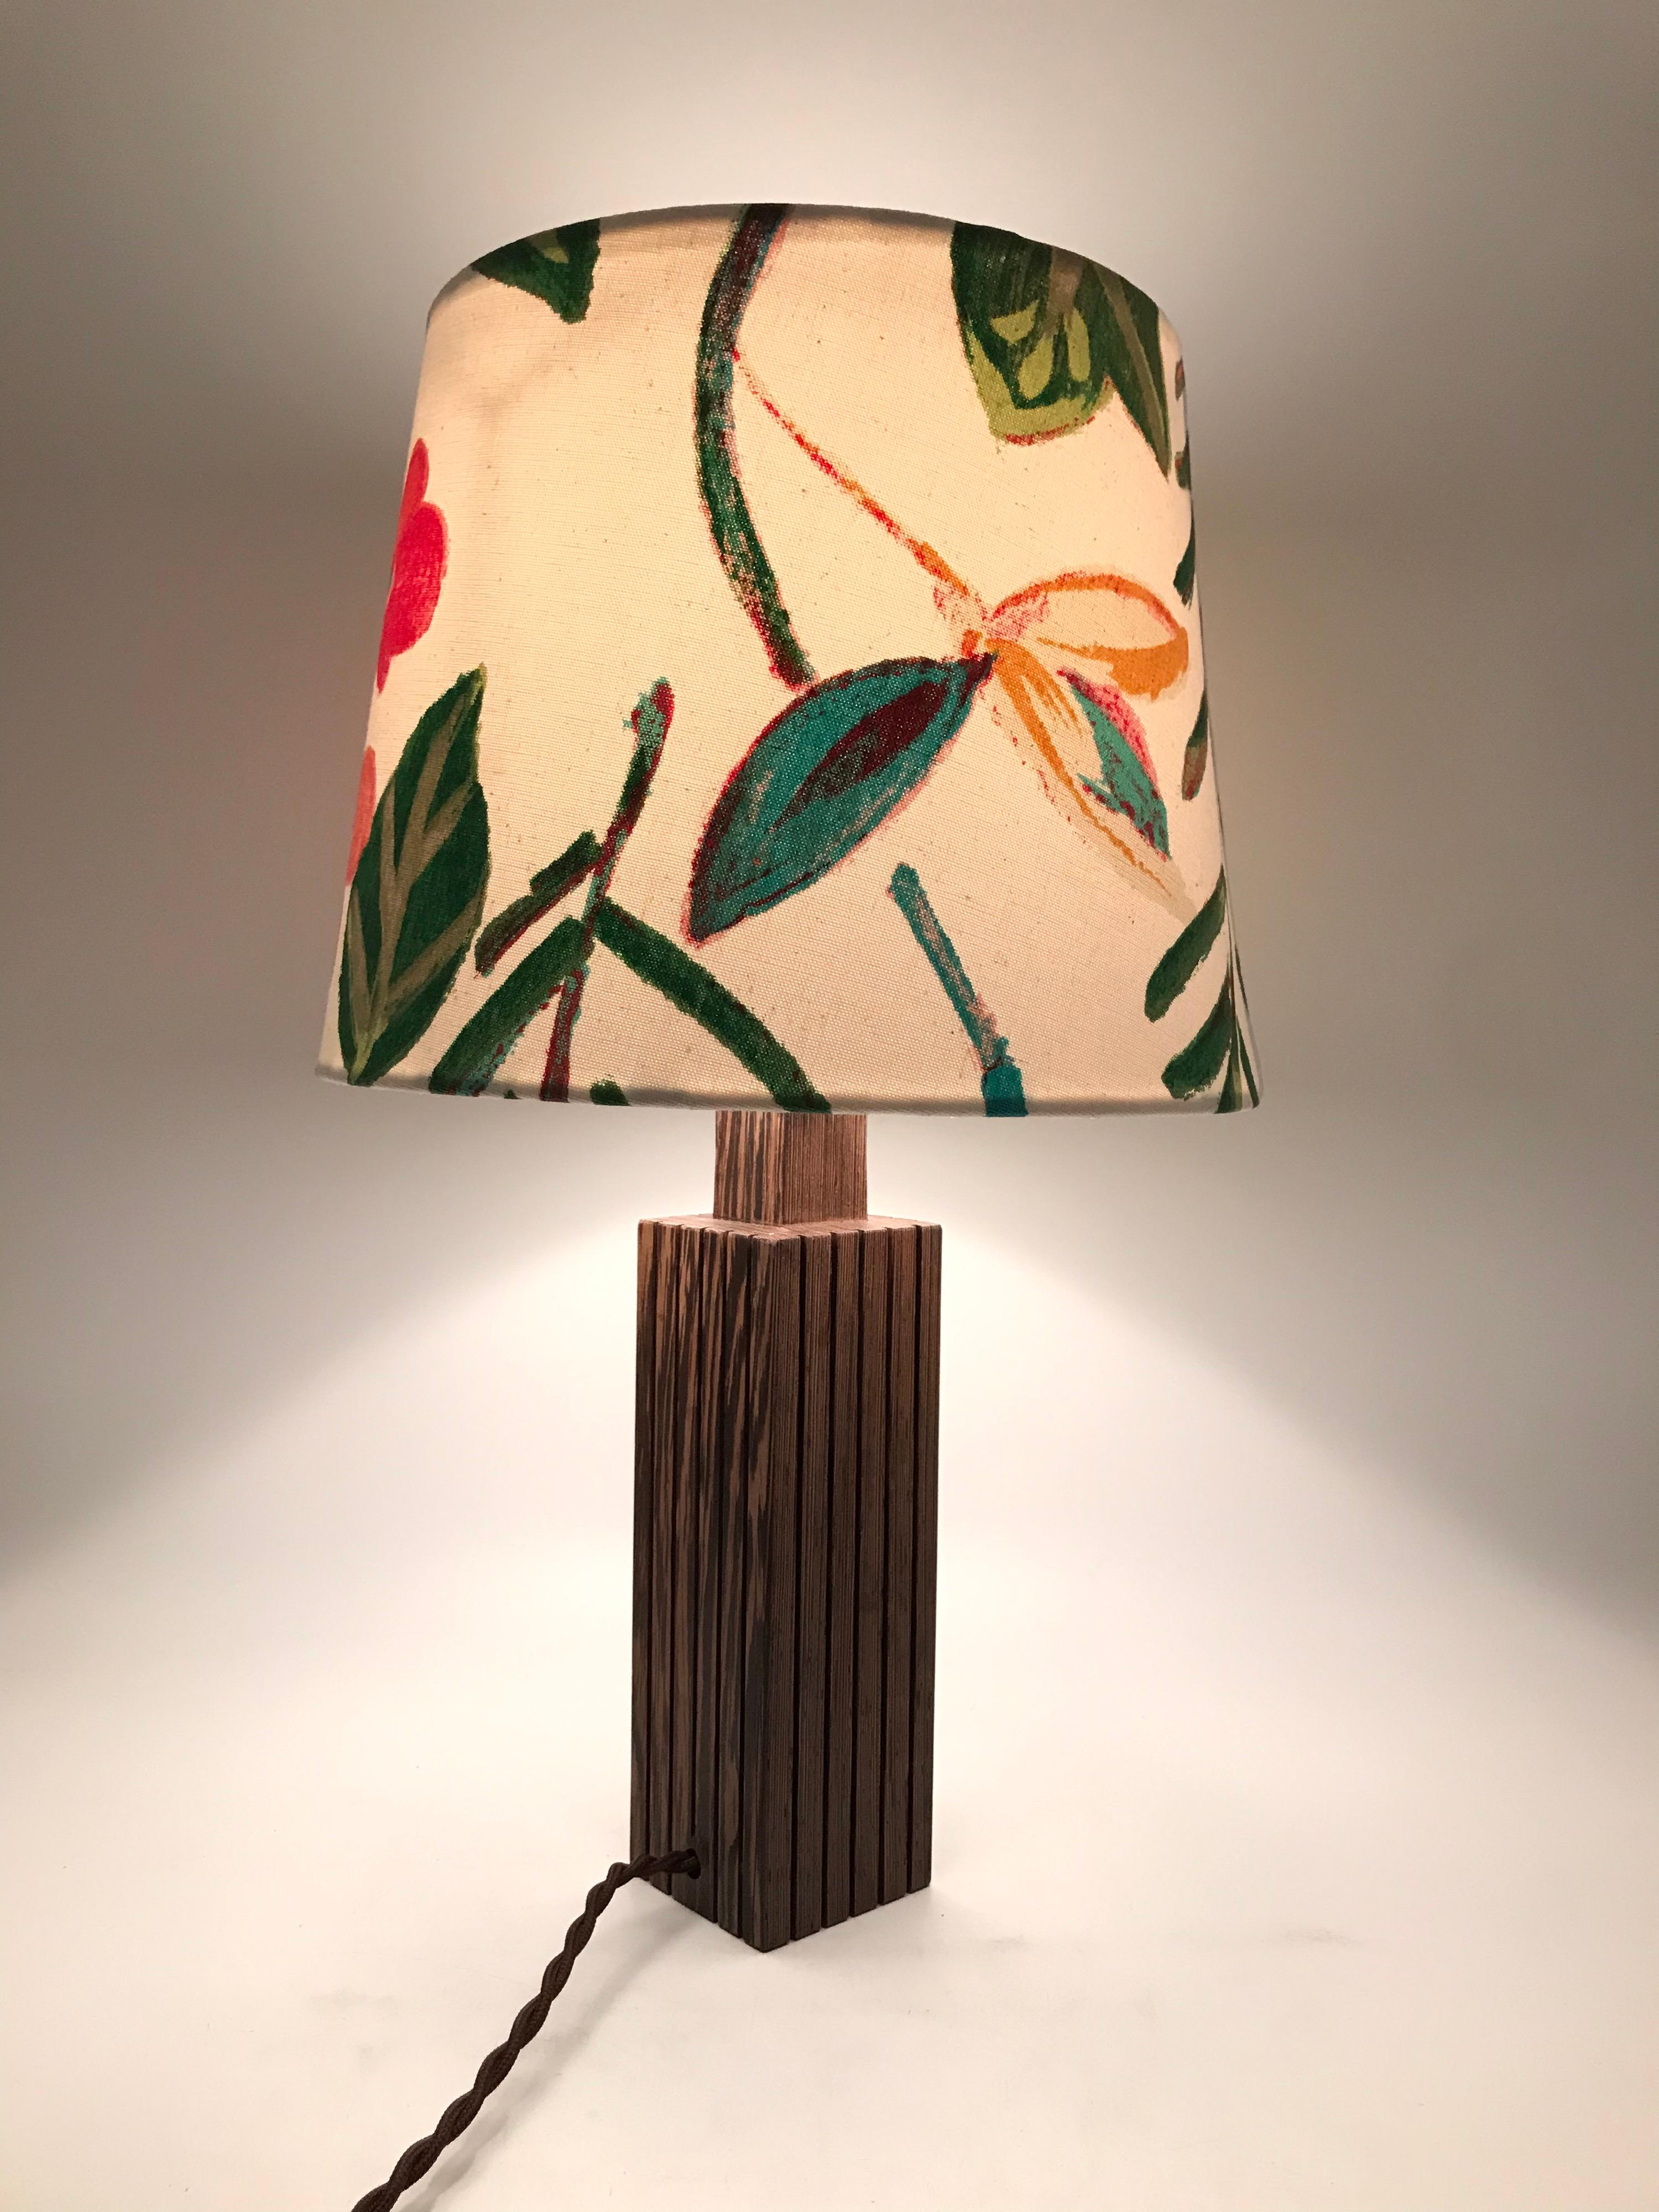 Vintage Danish Mid-Century Modern mahogany table lamp
A beautiful floral print on a white cotton background looks amazing together with the mahogany lamp.
The lamp retains its original Bakelite E27 bulb holder and has been fitted with a new twisted